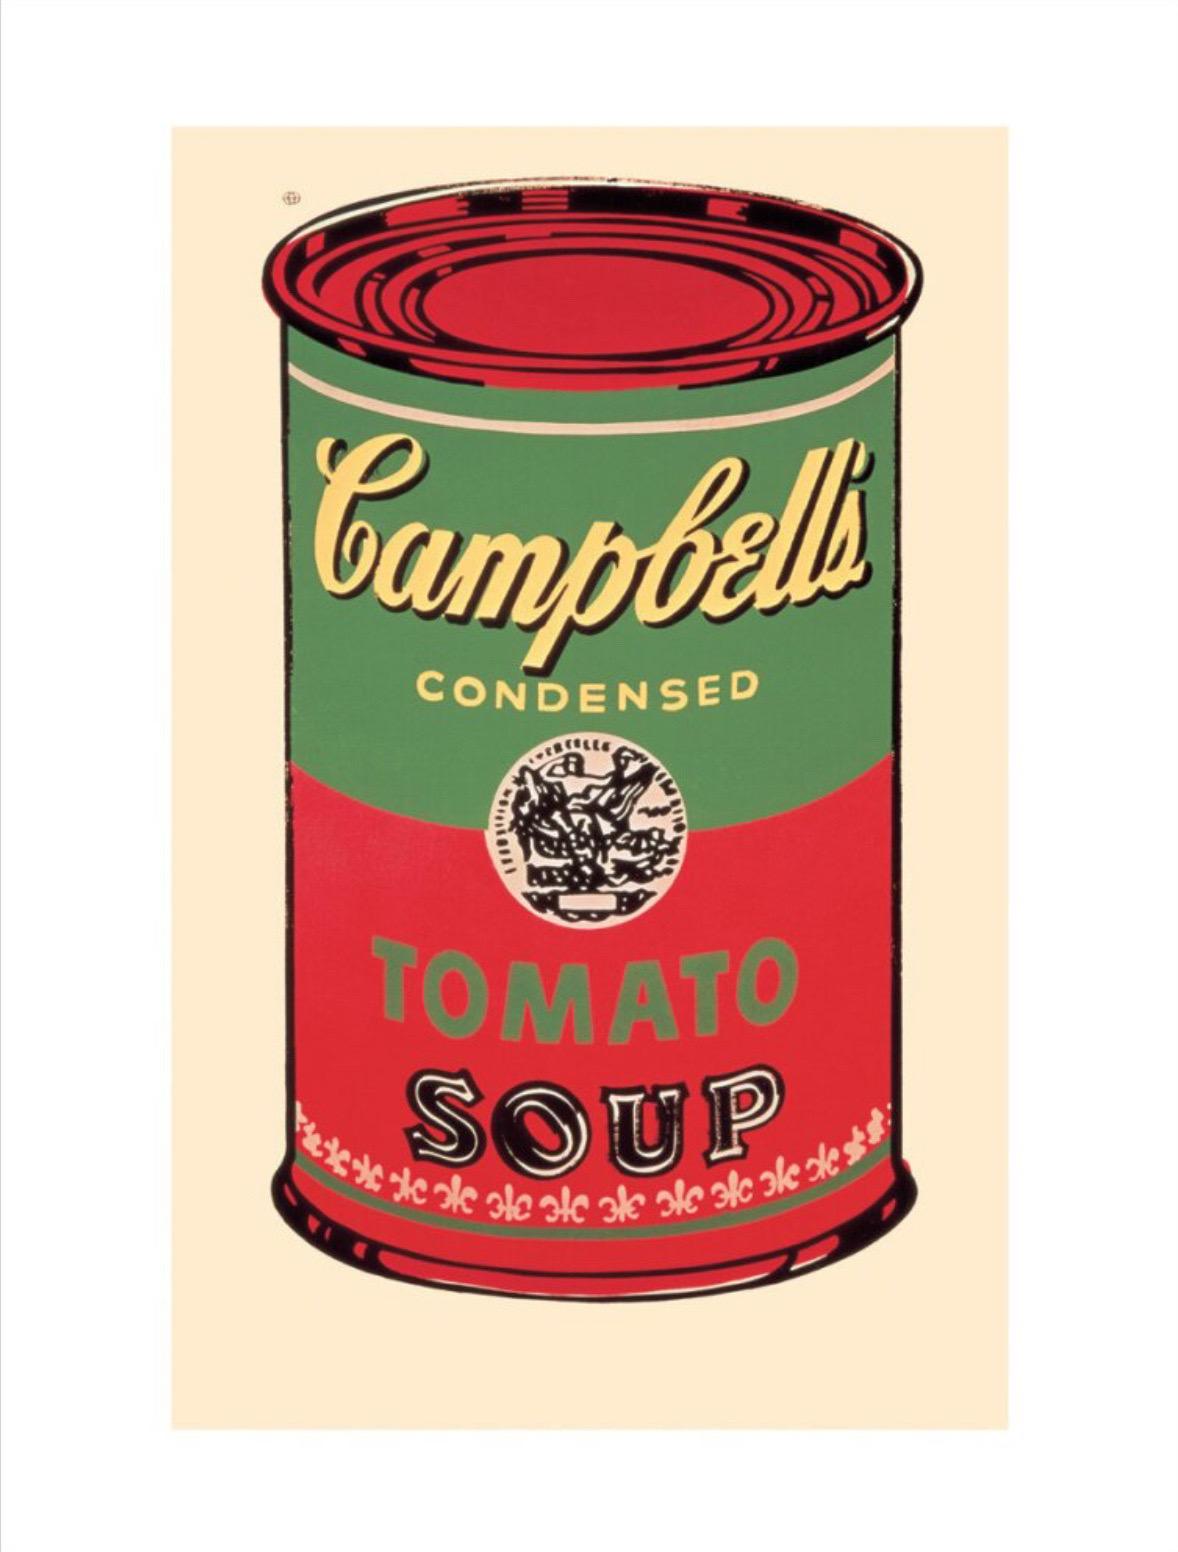 What is the meaning of Andy Warhol’s soup cans?